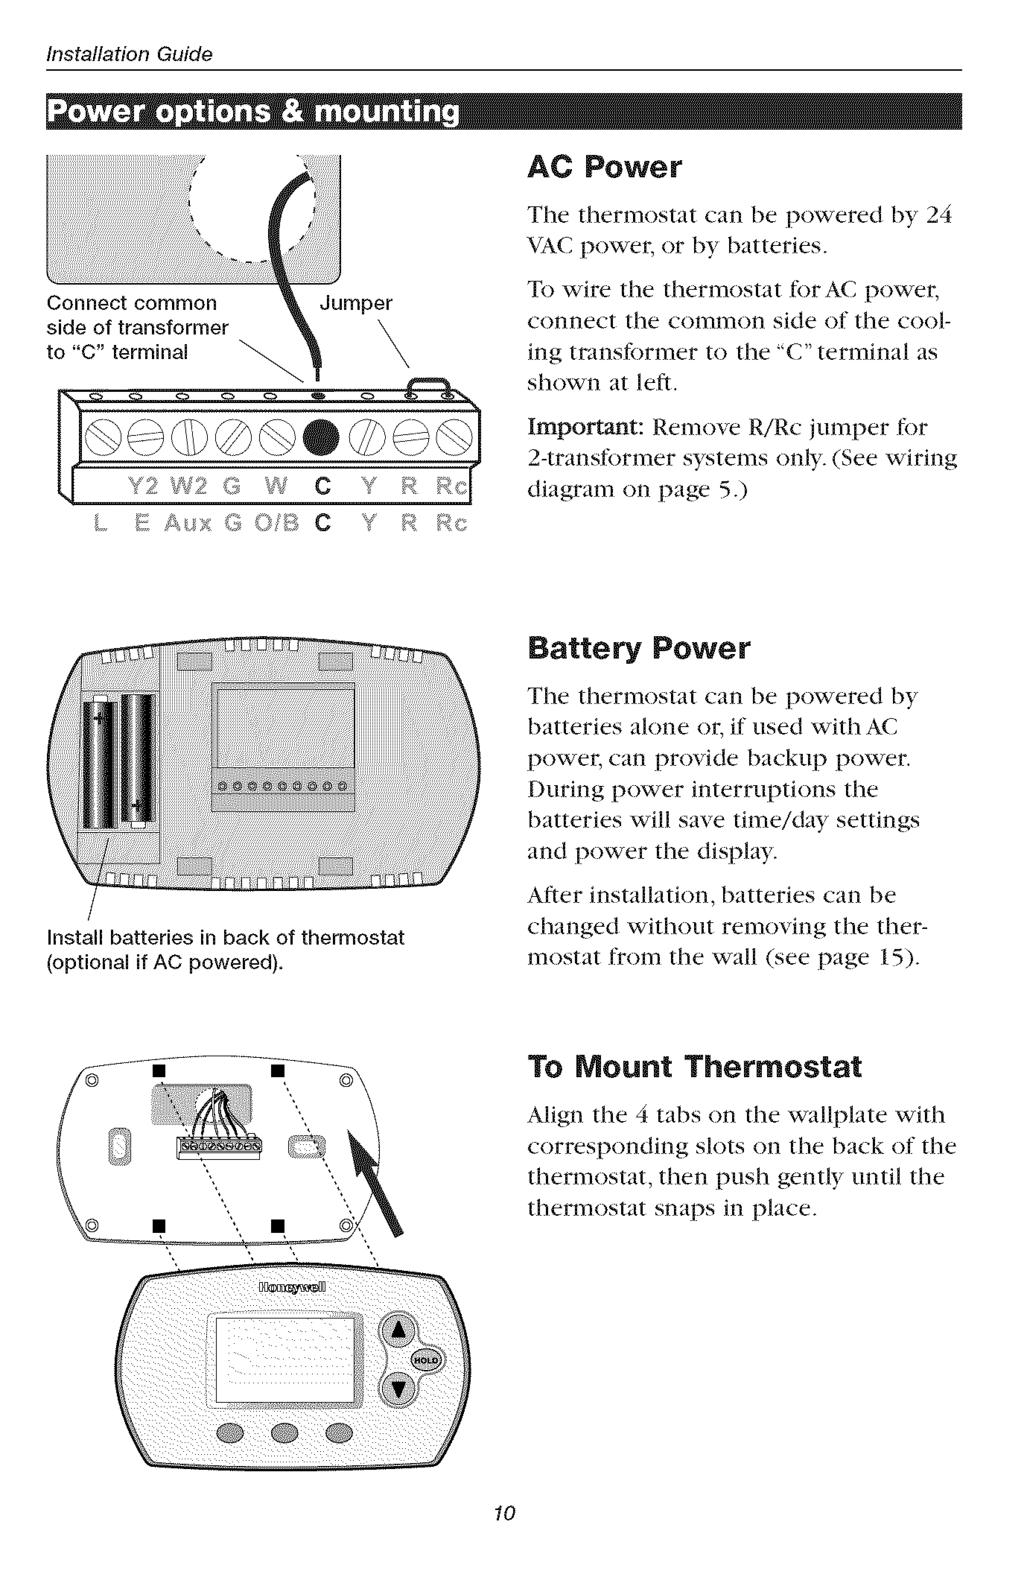 Installation Guide AC Power Connect common side of transformer to "C" terminal Jumper The thermostat can be powered by 24 VAC power, or by batteries.